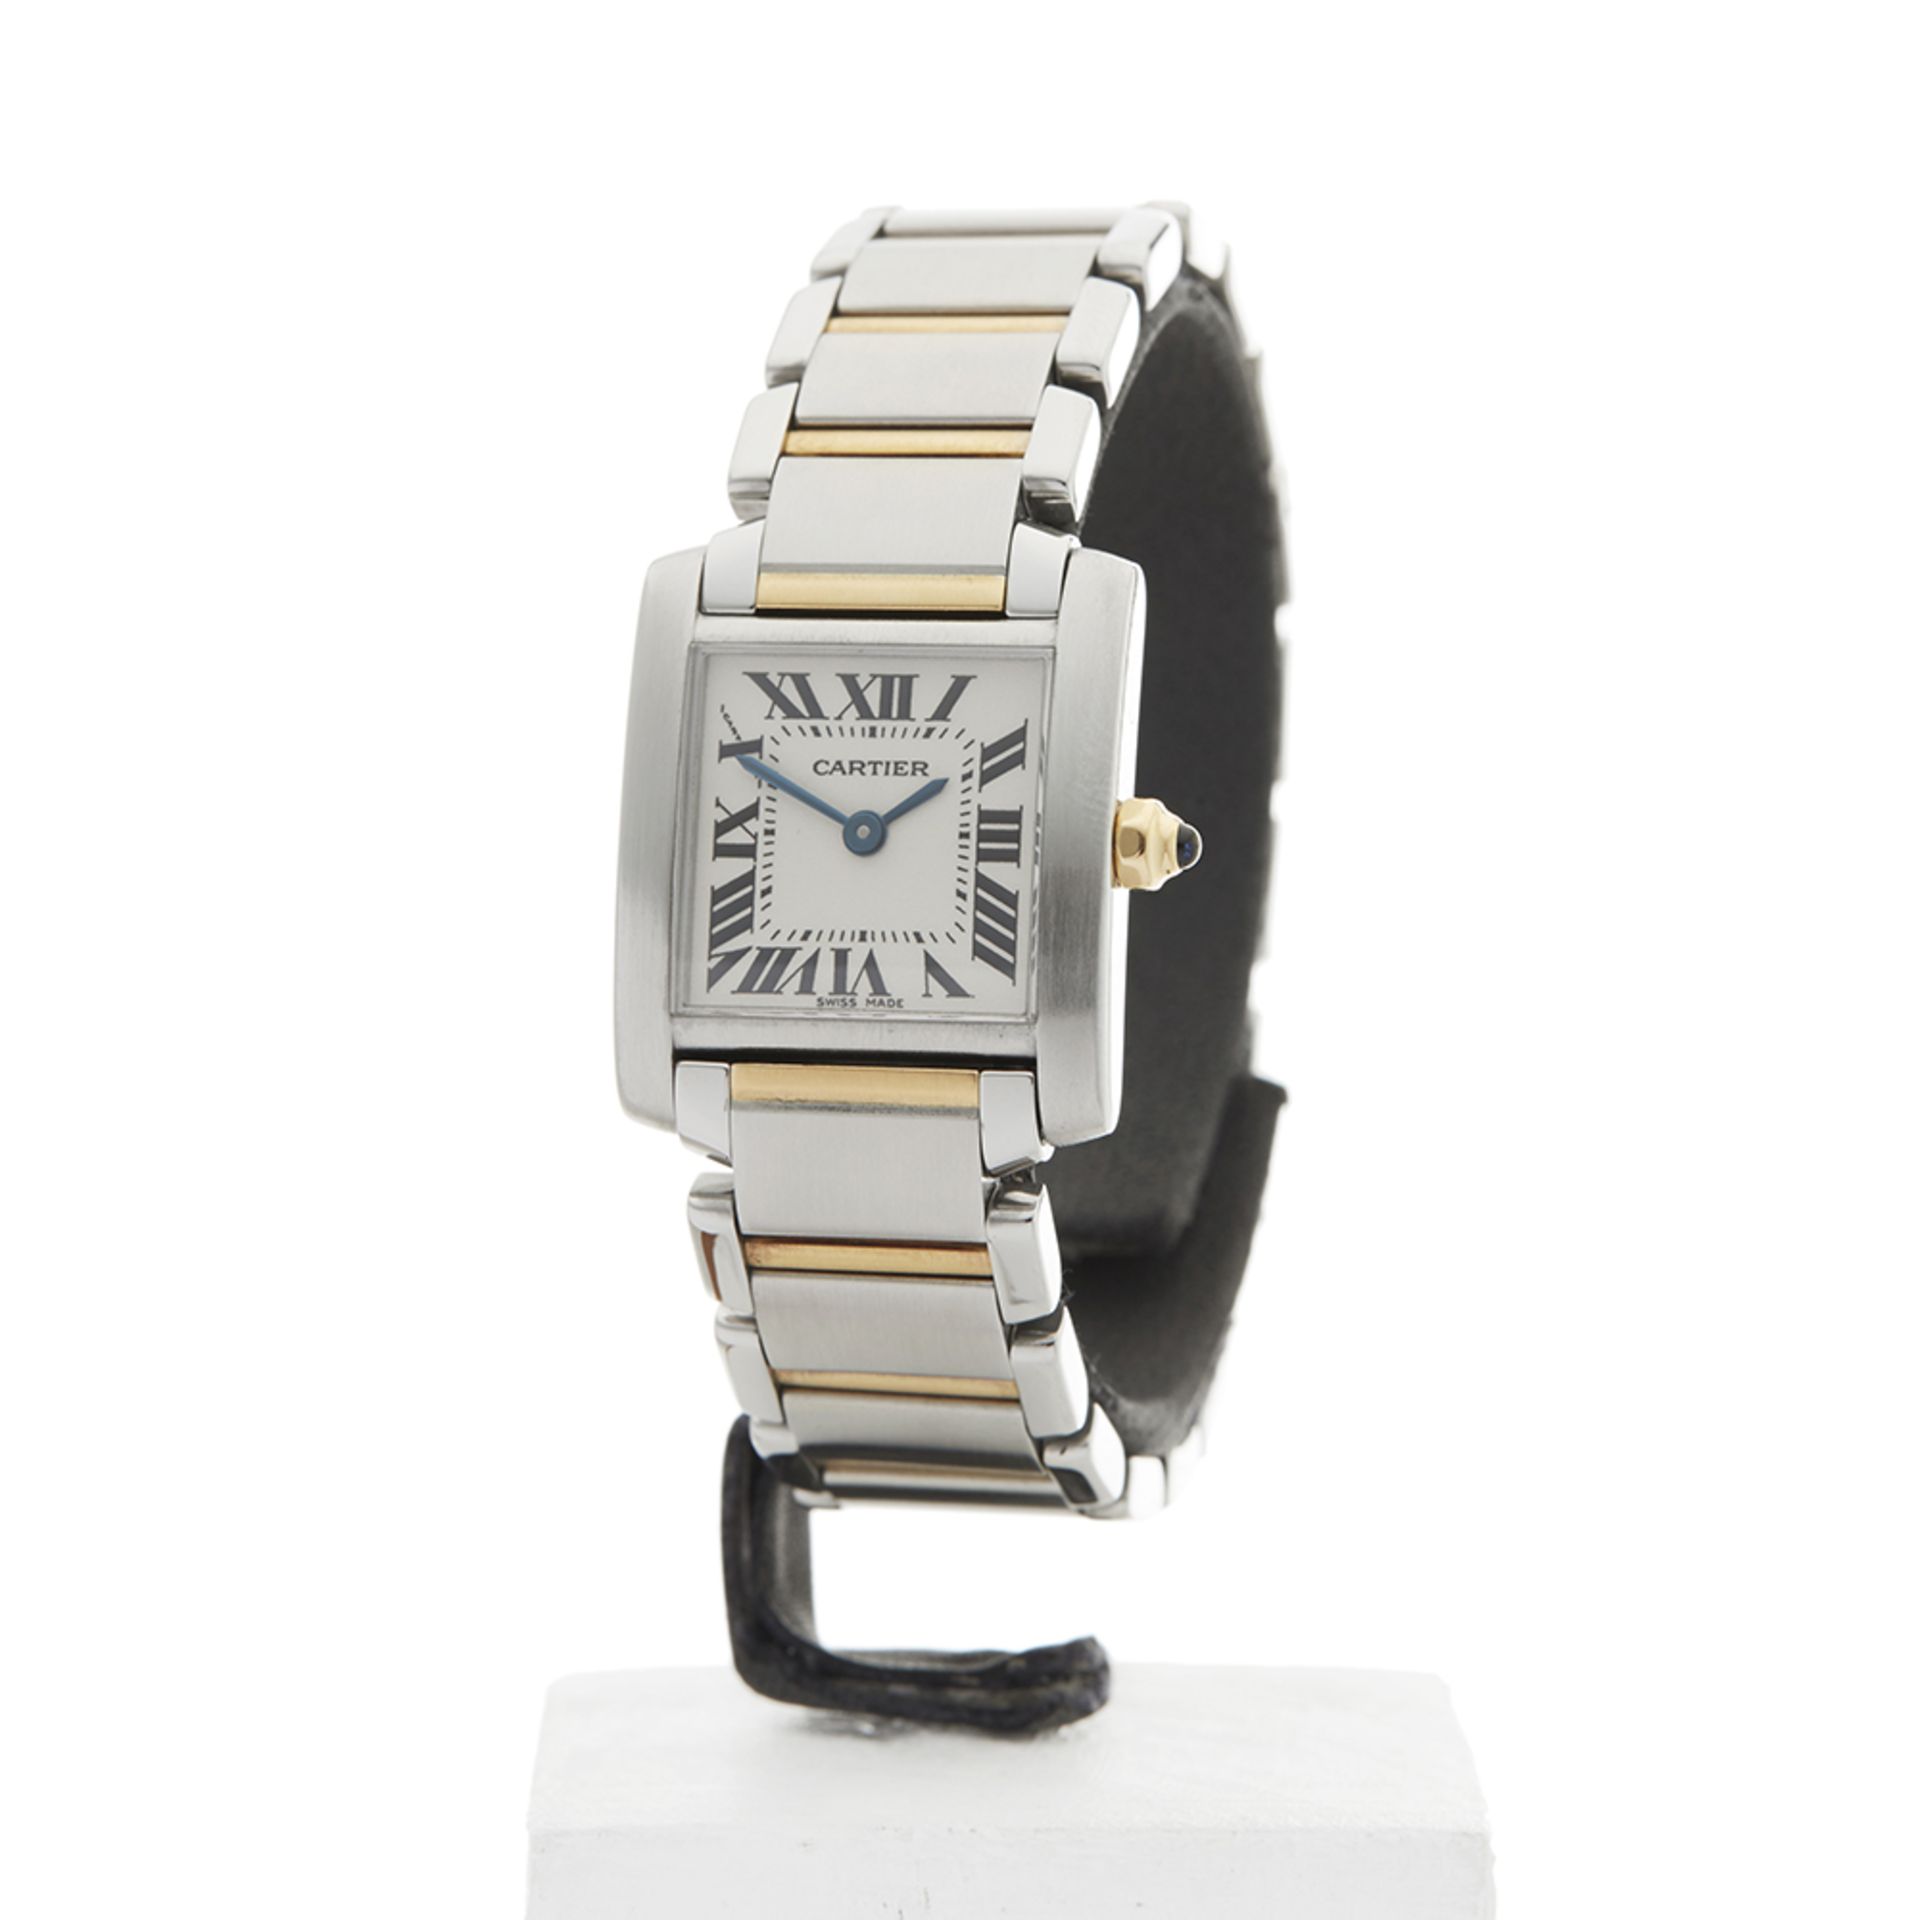 Cartier Tank Francaise 20mm stainless steel and 18k yellow gold 2300